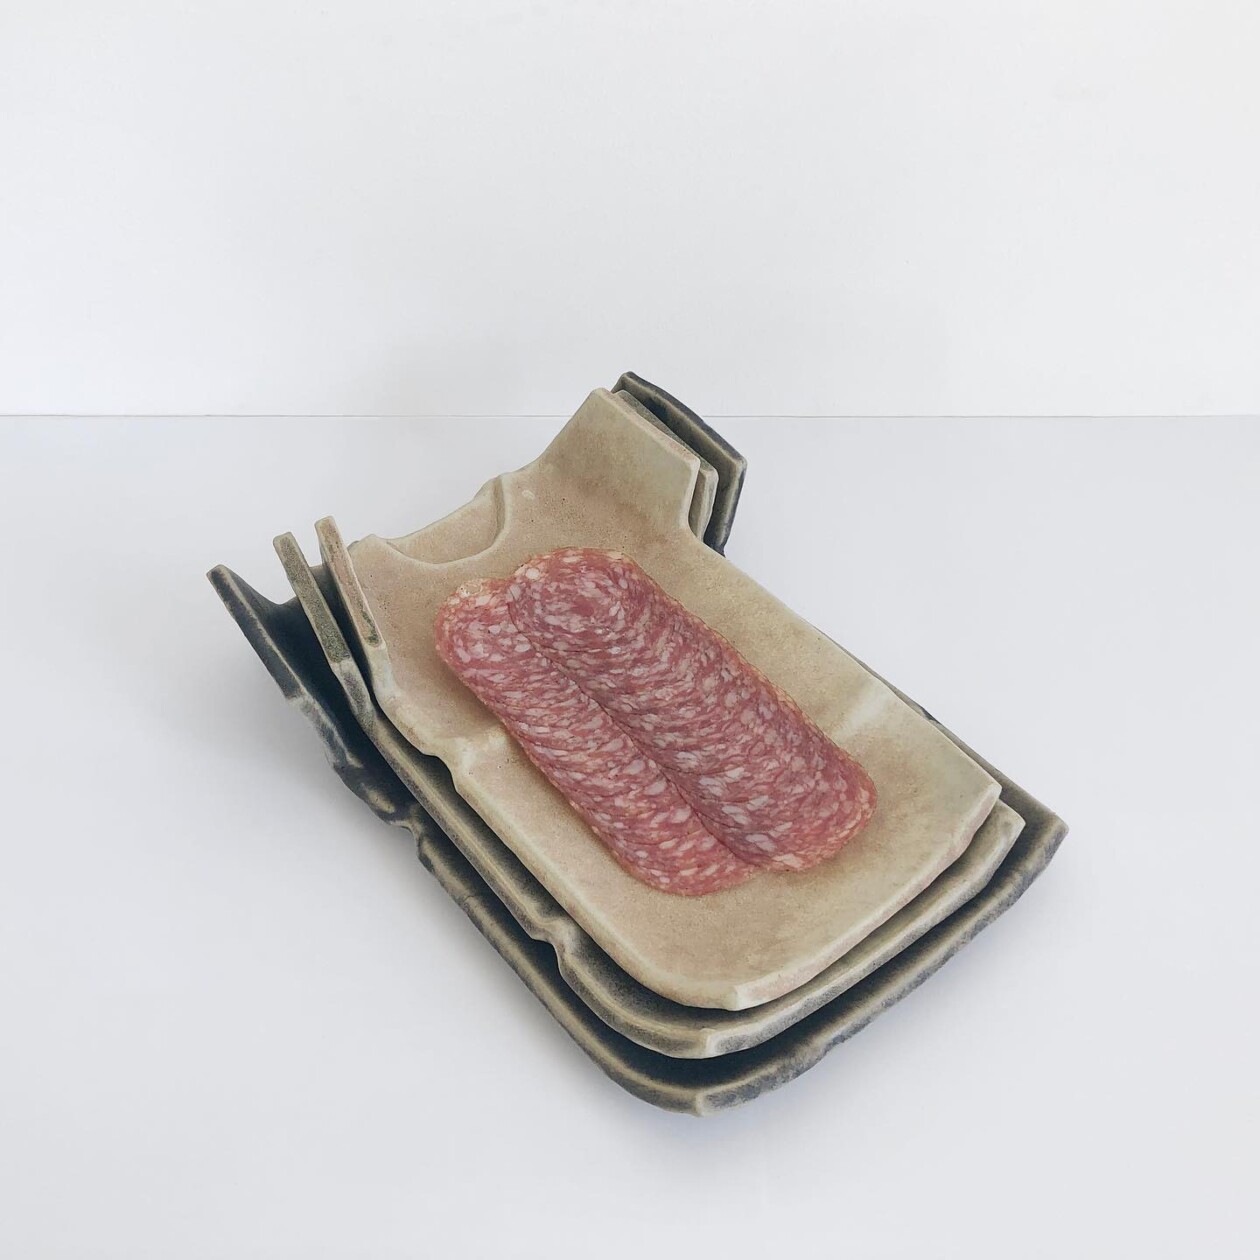 Food Based Ceramic Sculptures By Eléonore Joulin (2)